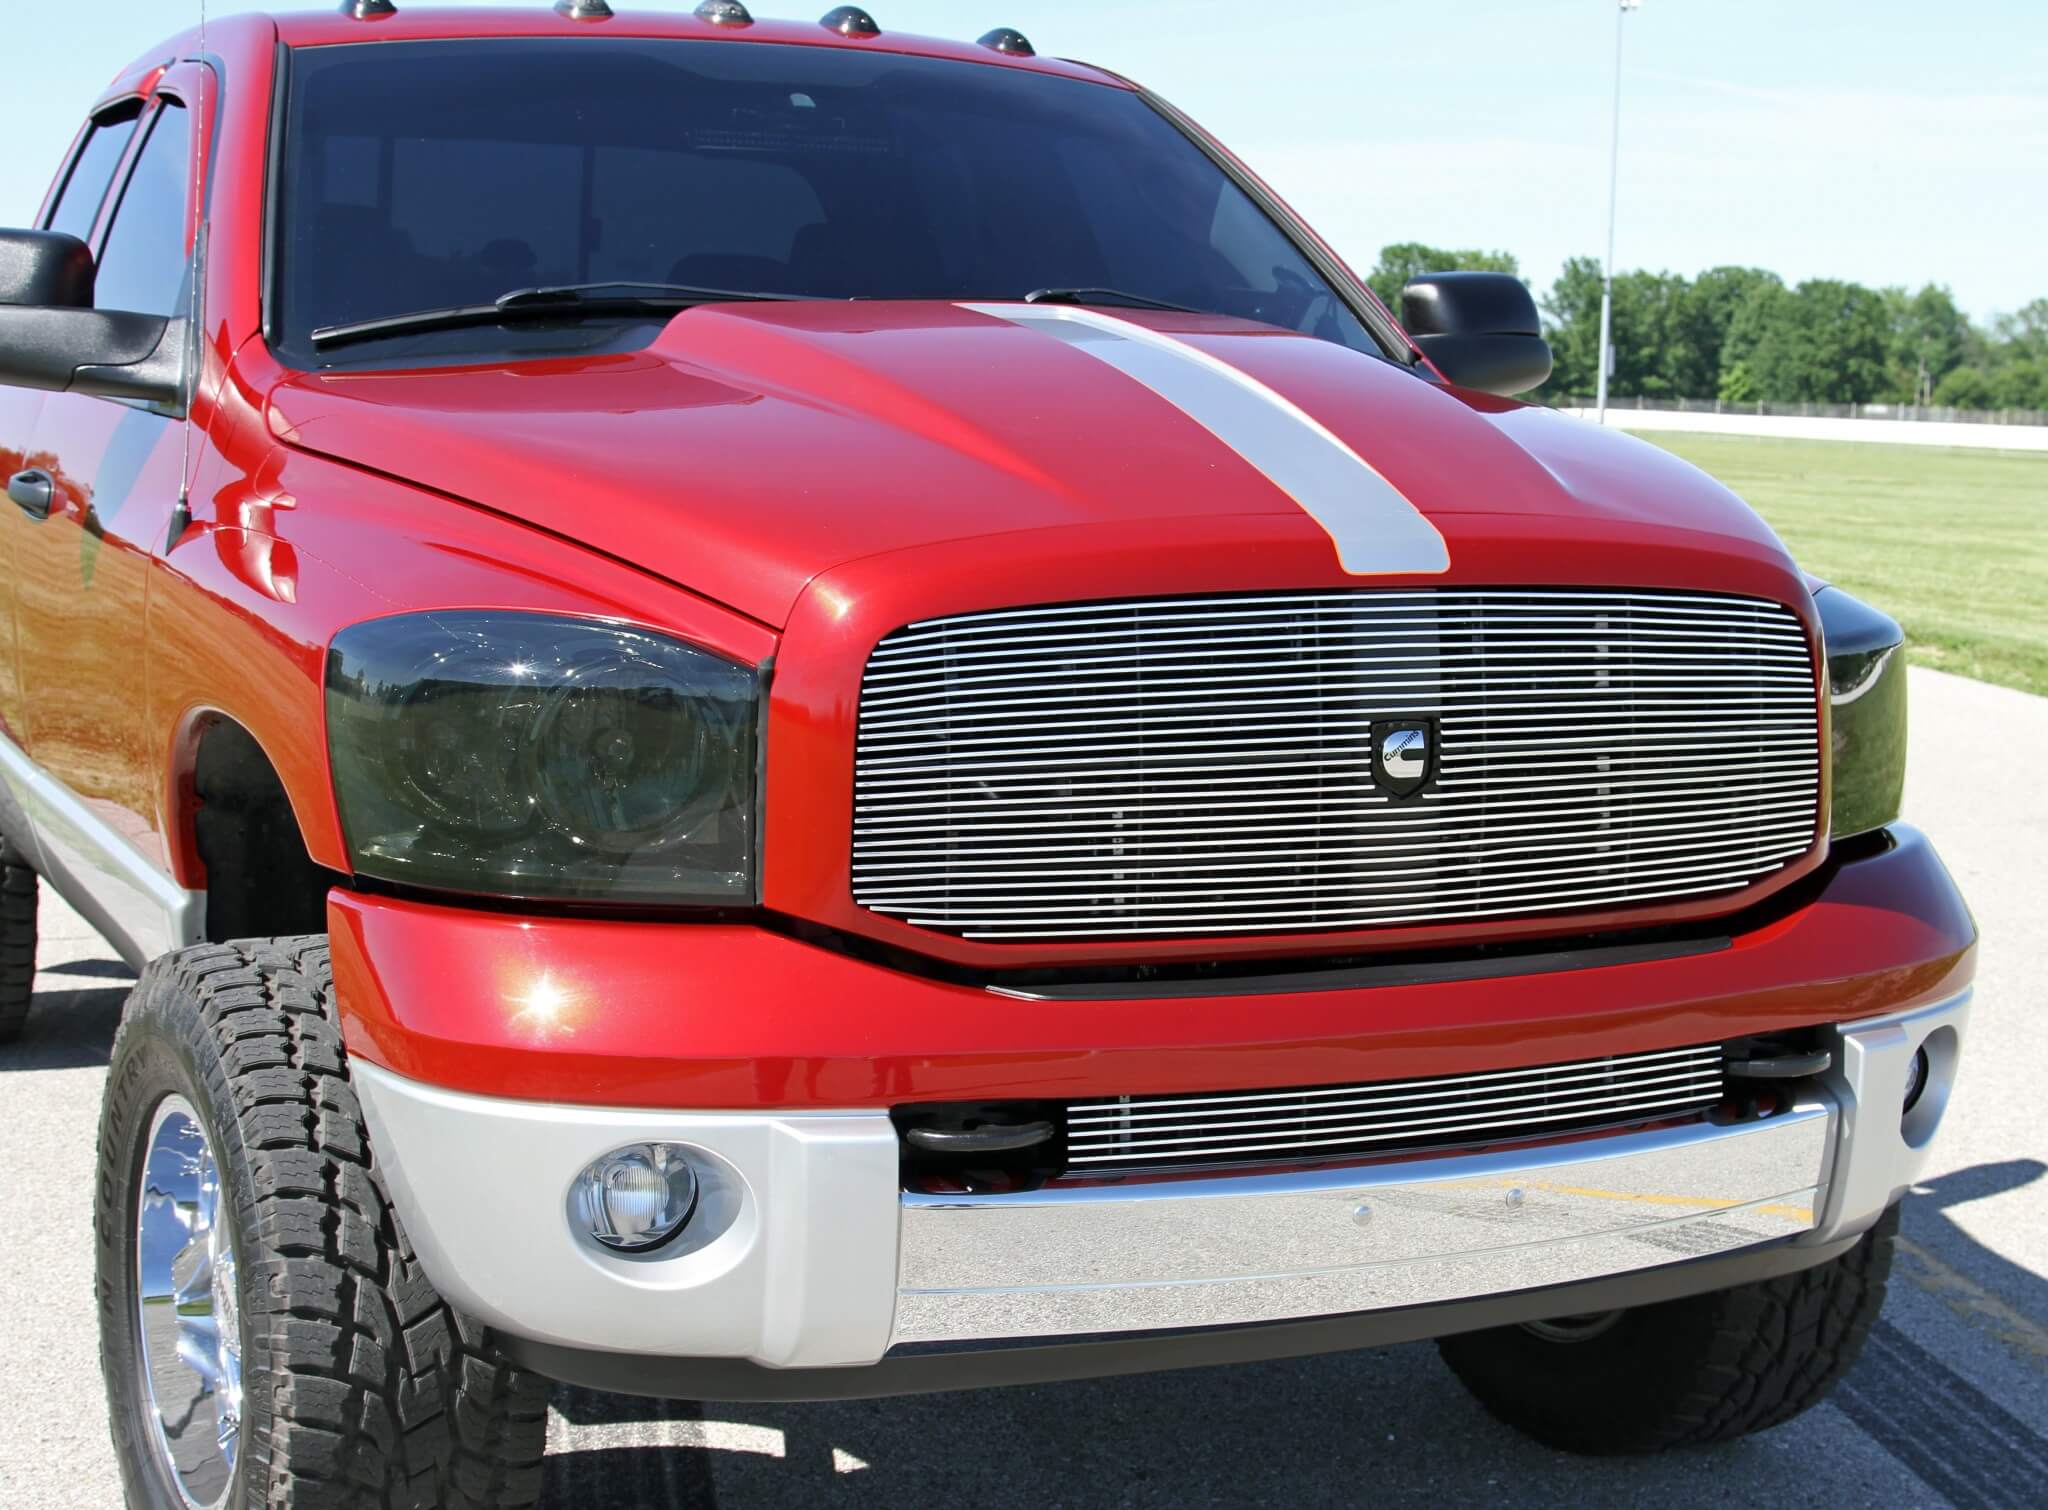 To give his truck a unique look, Nick Chase installed a cowl-style steel hood, Laramie bumper and custom billet grille, and then had the crew at Tom Rose Auto Body work their magic with a two-tone combination that’s brighter and bolder than stock to really make the truck pop. The smoked headlight housings contain 6,000K HID bulbs to illuminate the road at night.